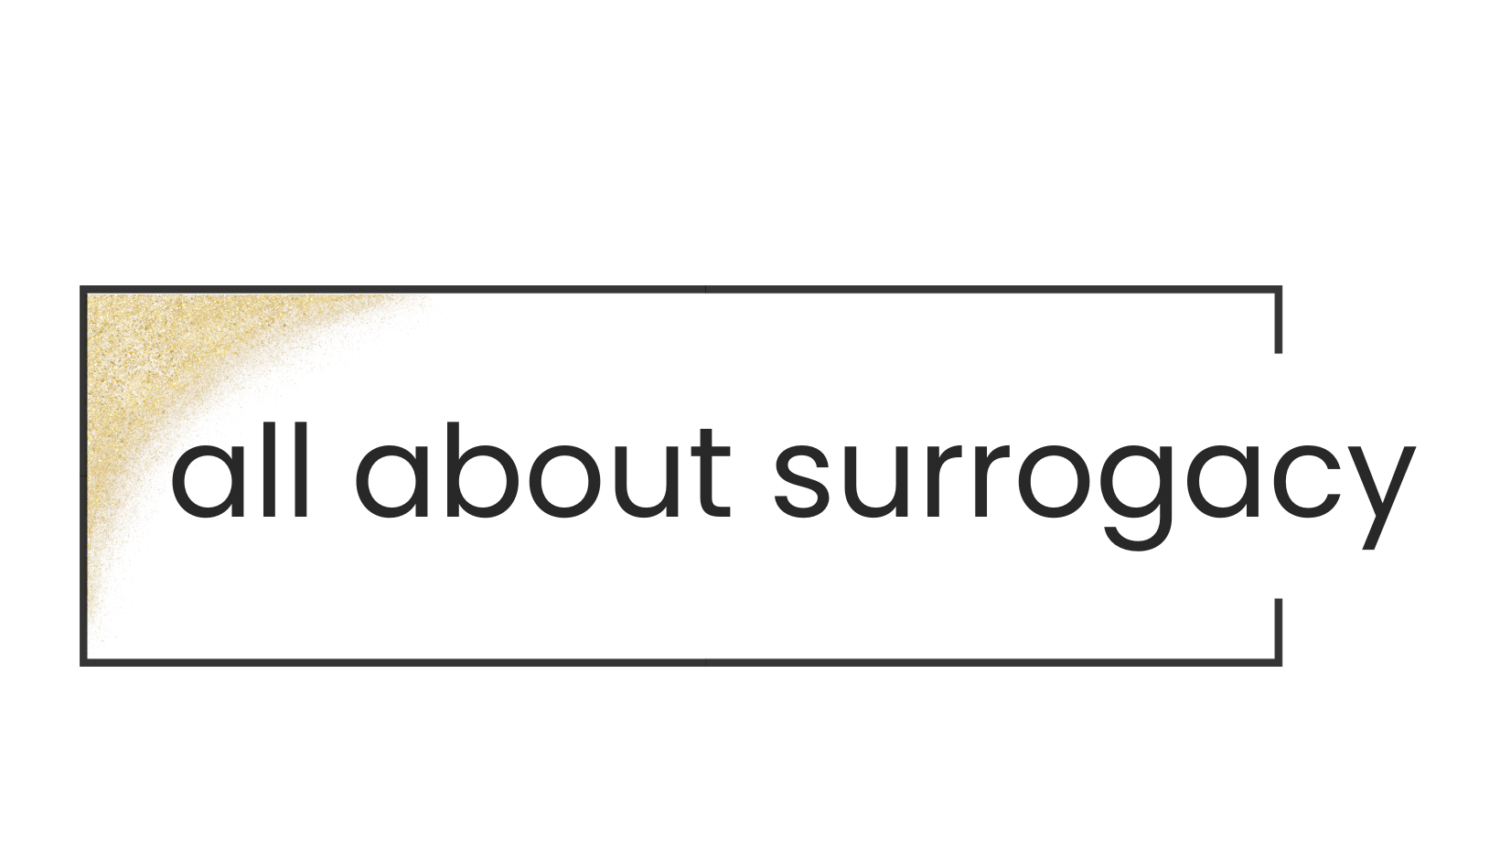 All About Surrogacy